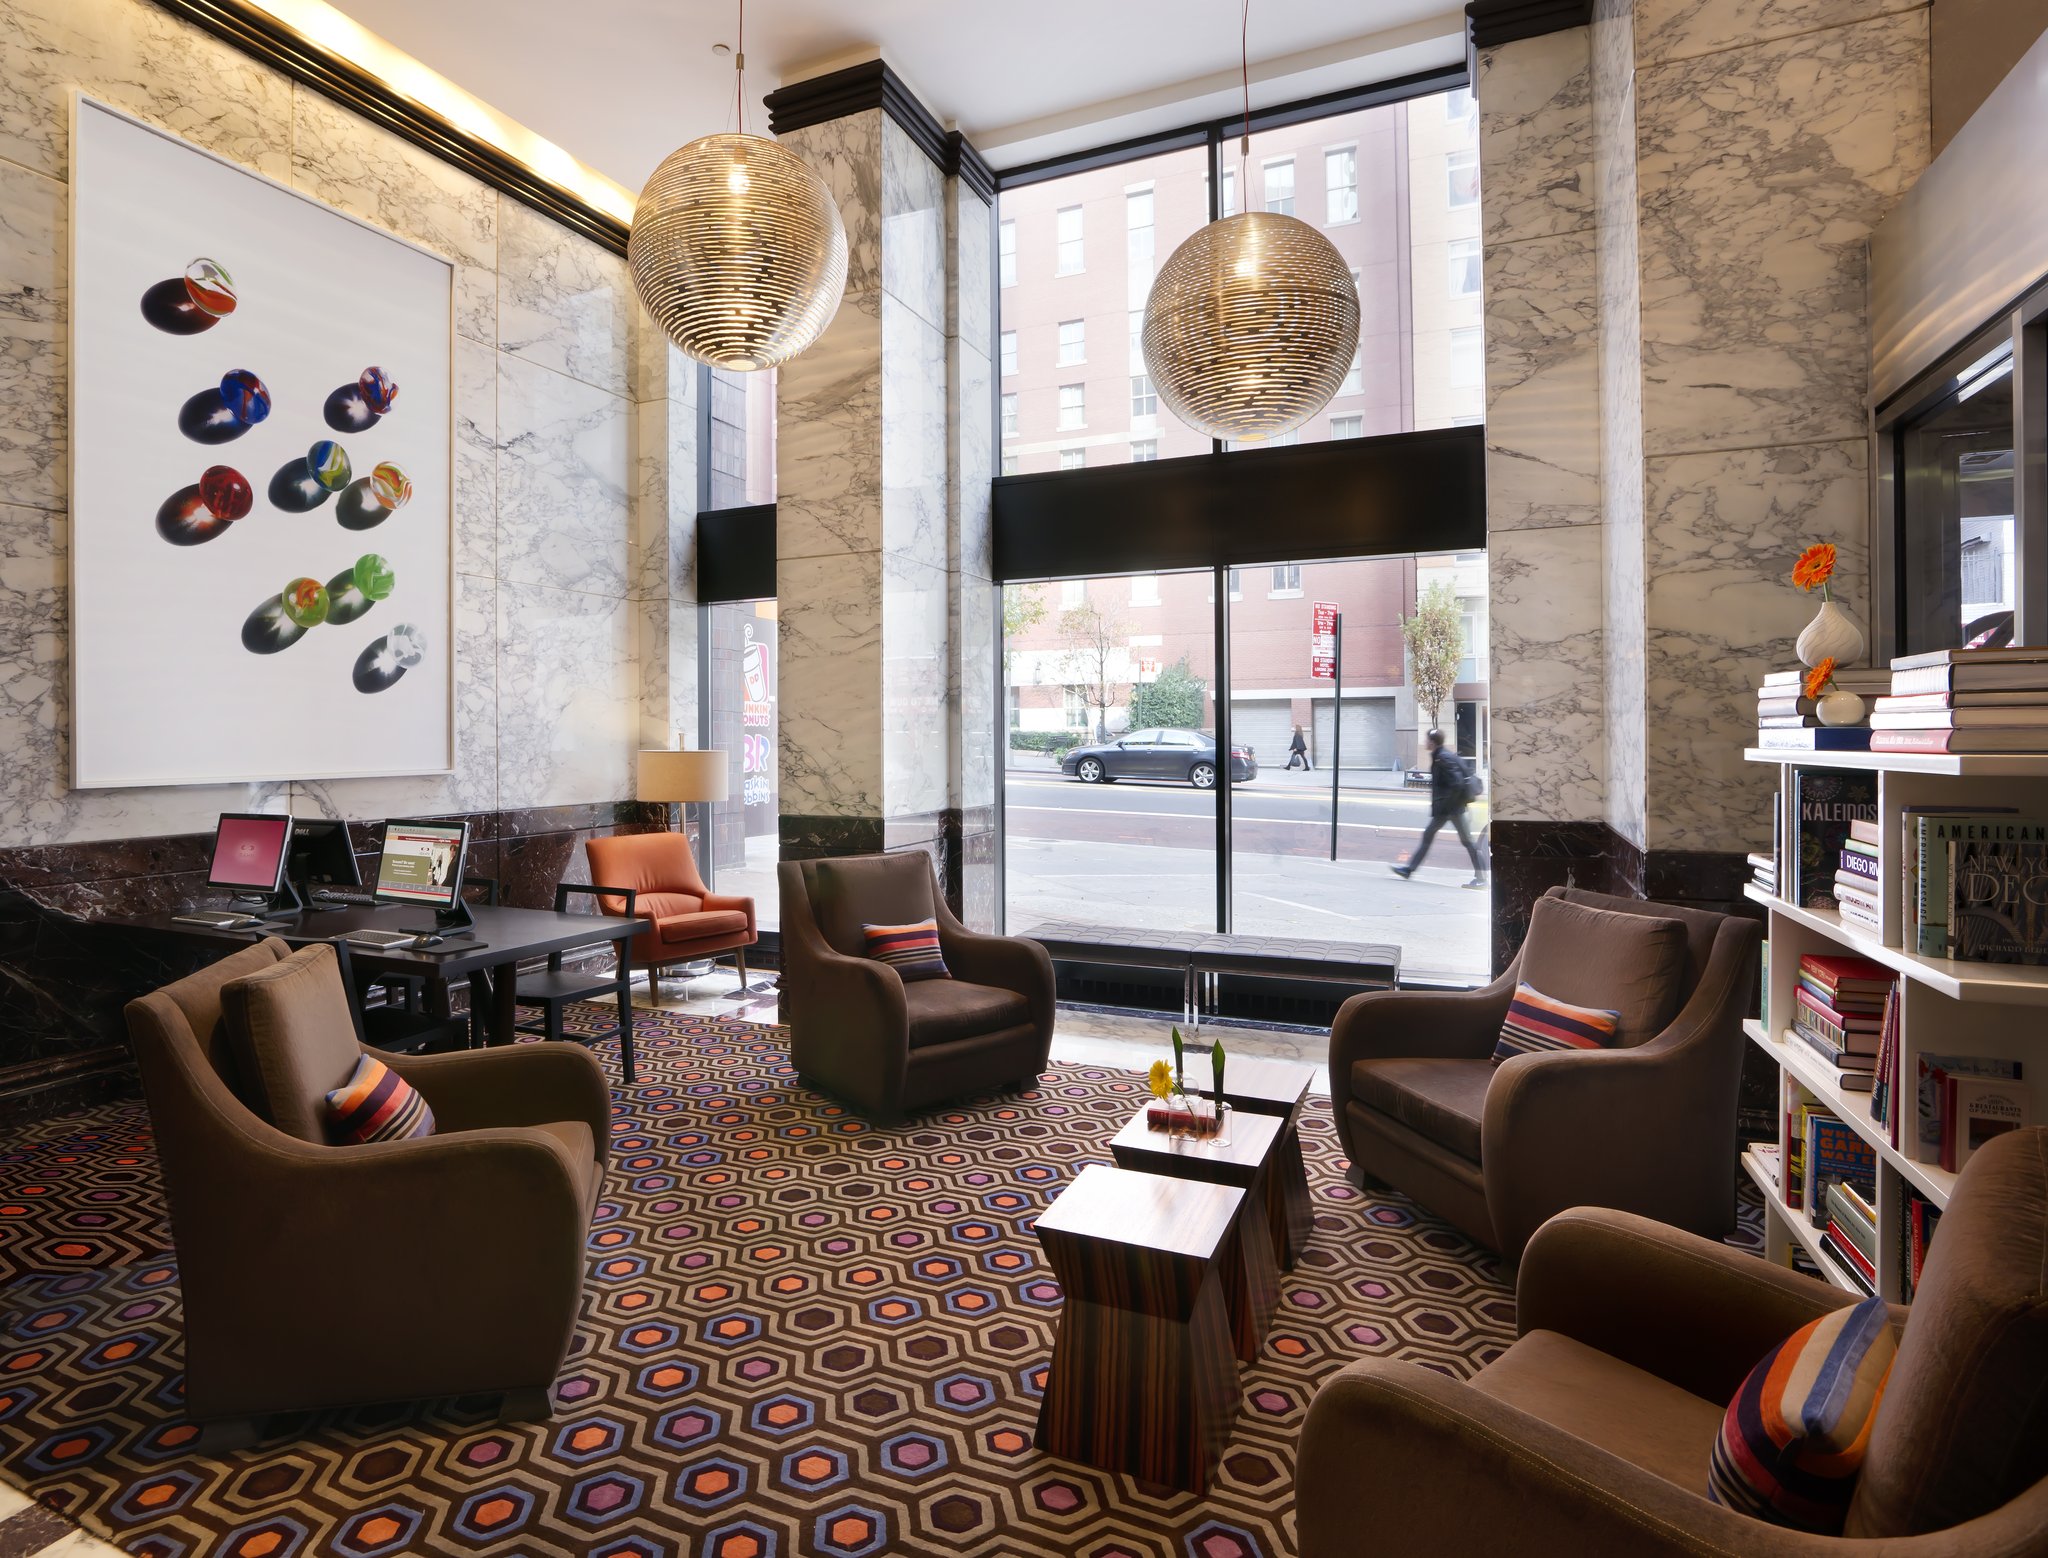 Dumont NYC, an Affinia Hotel